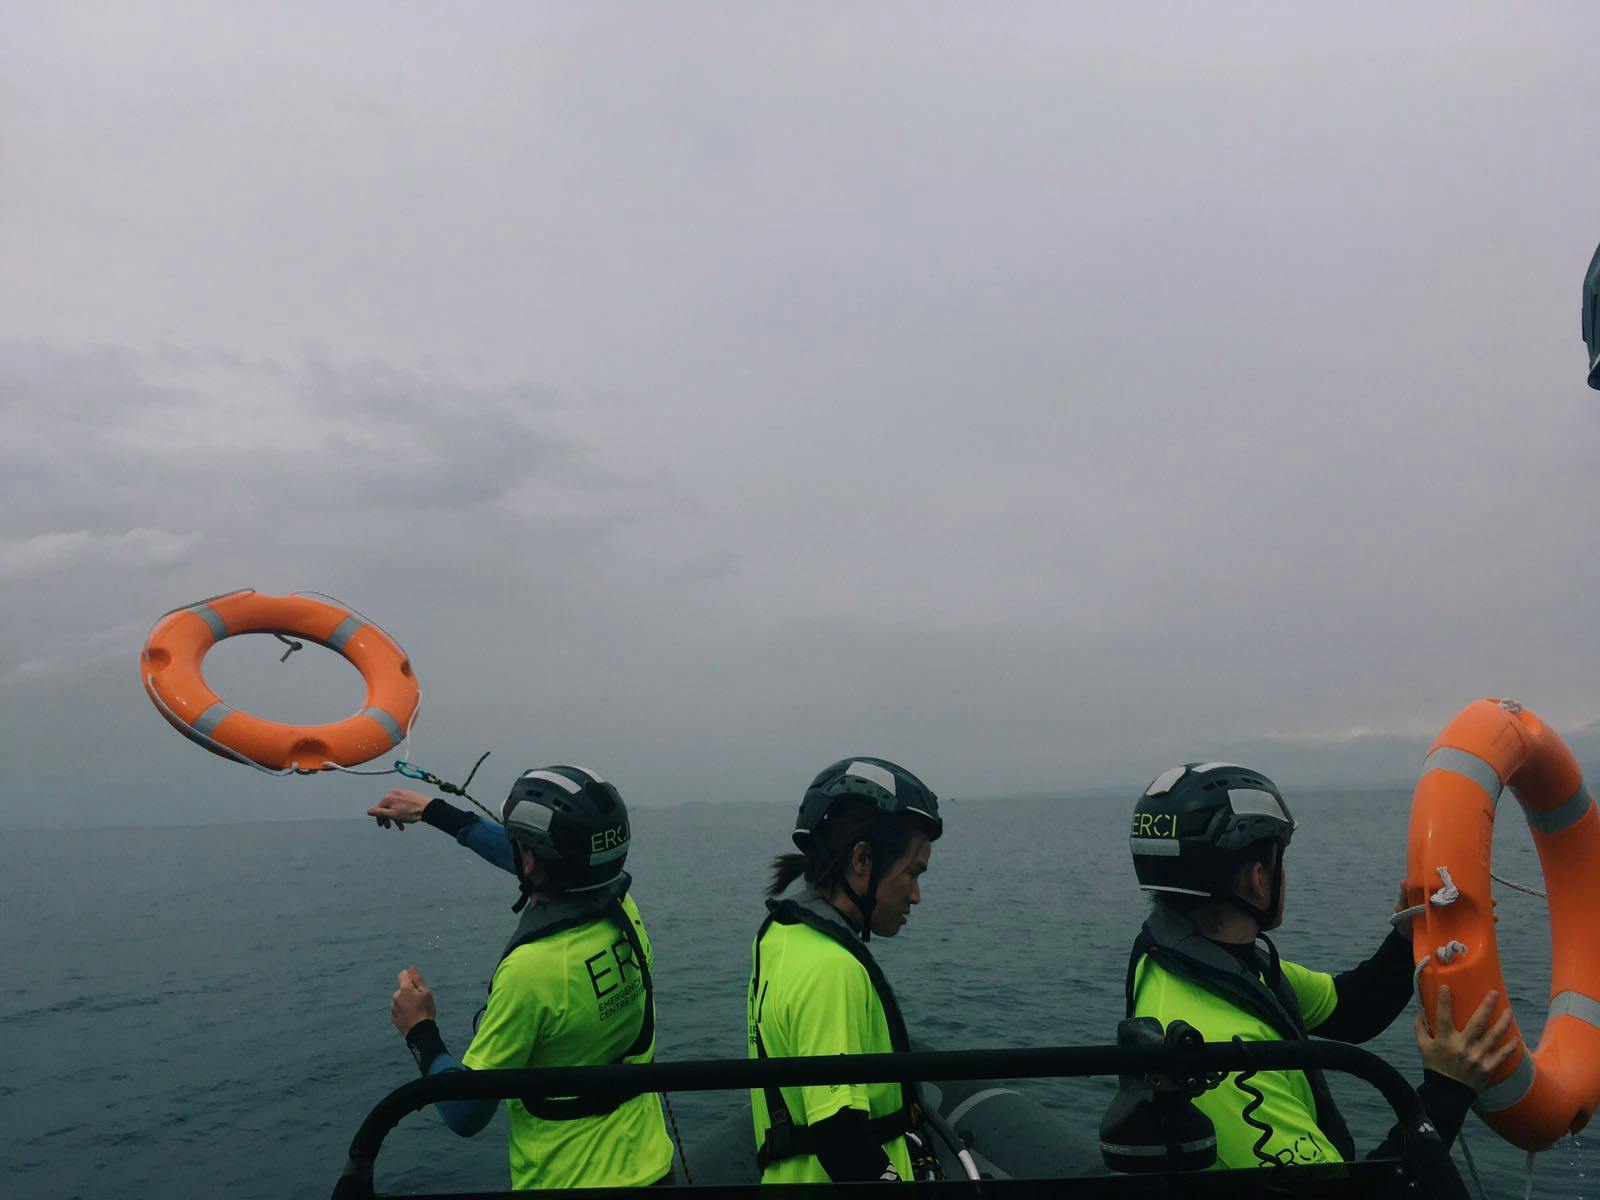 Three search and rescue workers in ERCI t-shirts stand on a boat looking out to sea. One throws a red lifebuoy into the water.